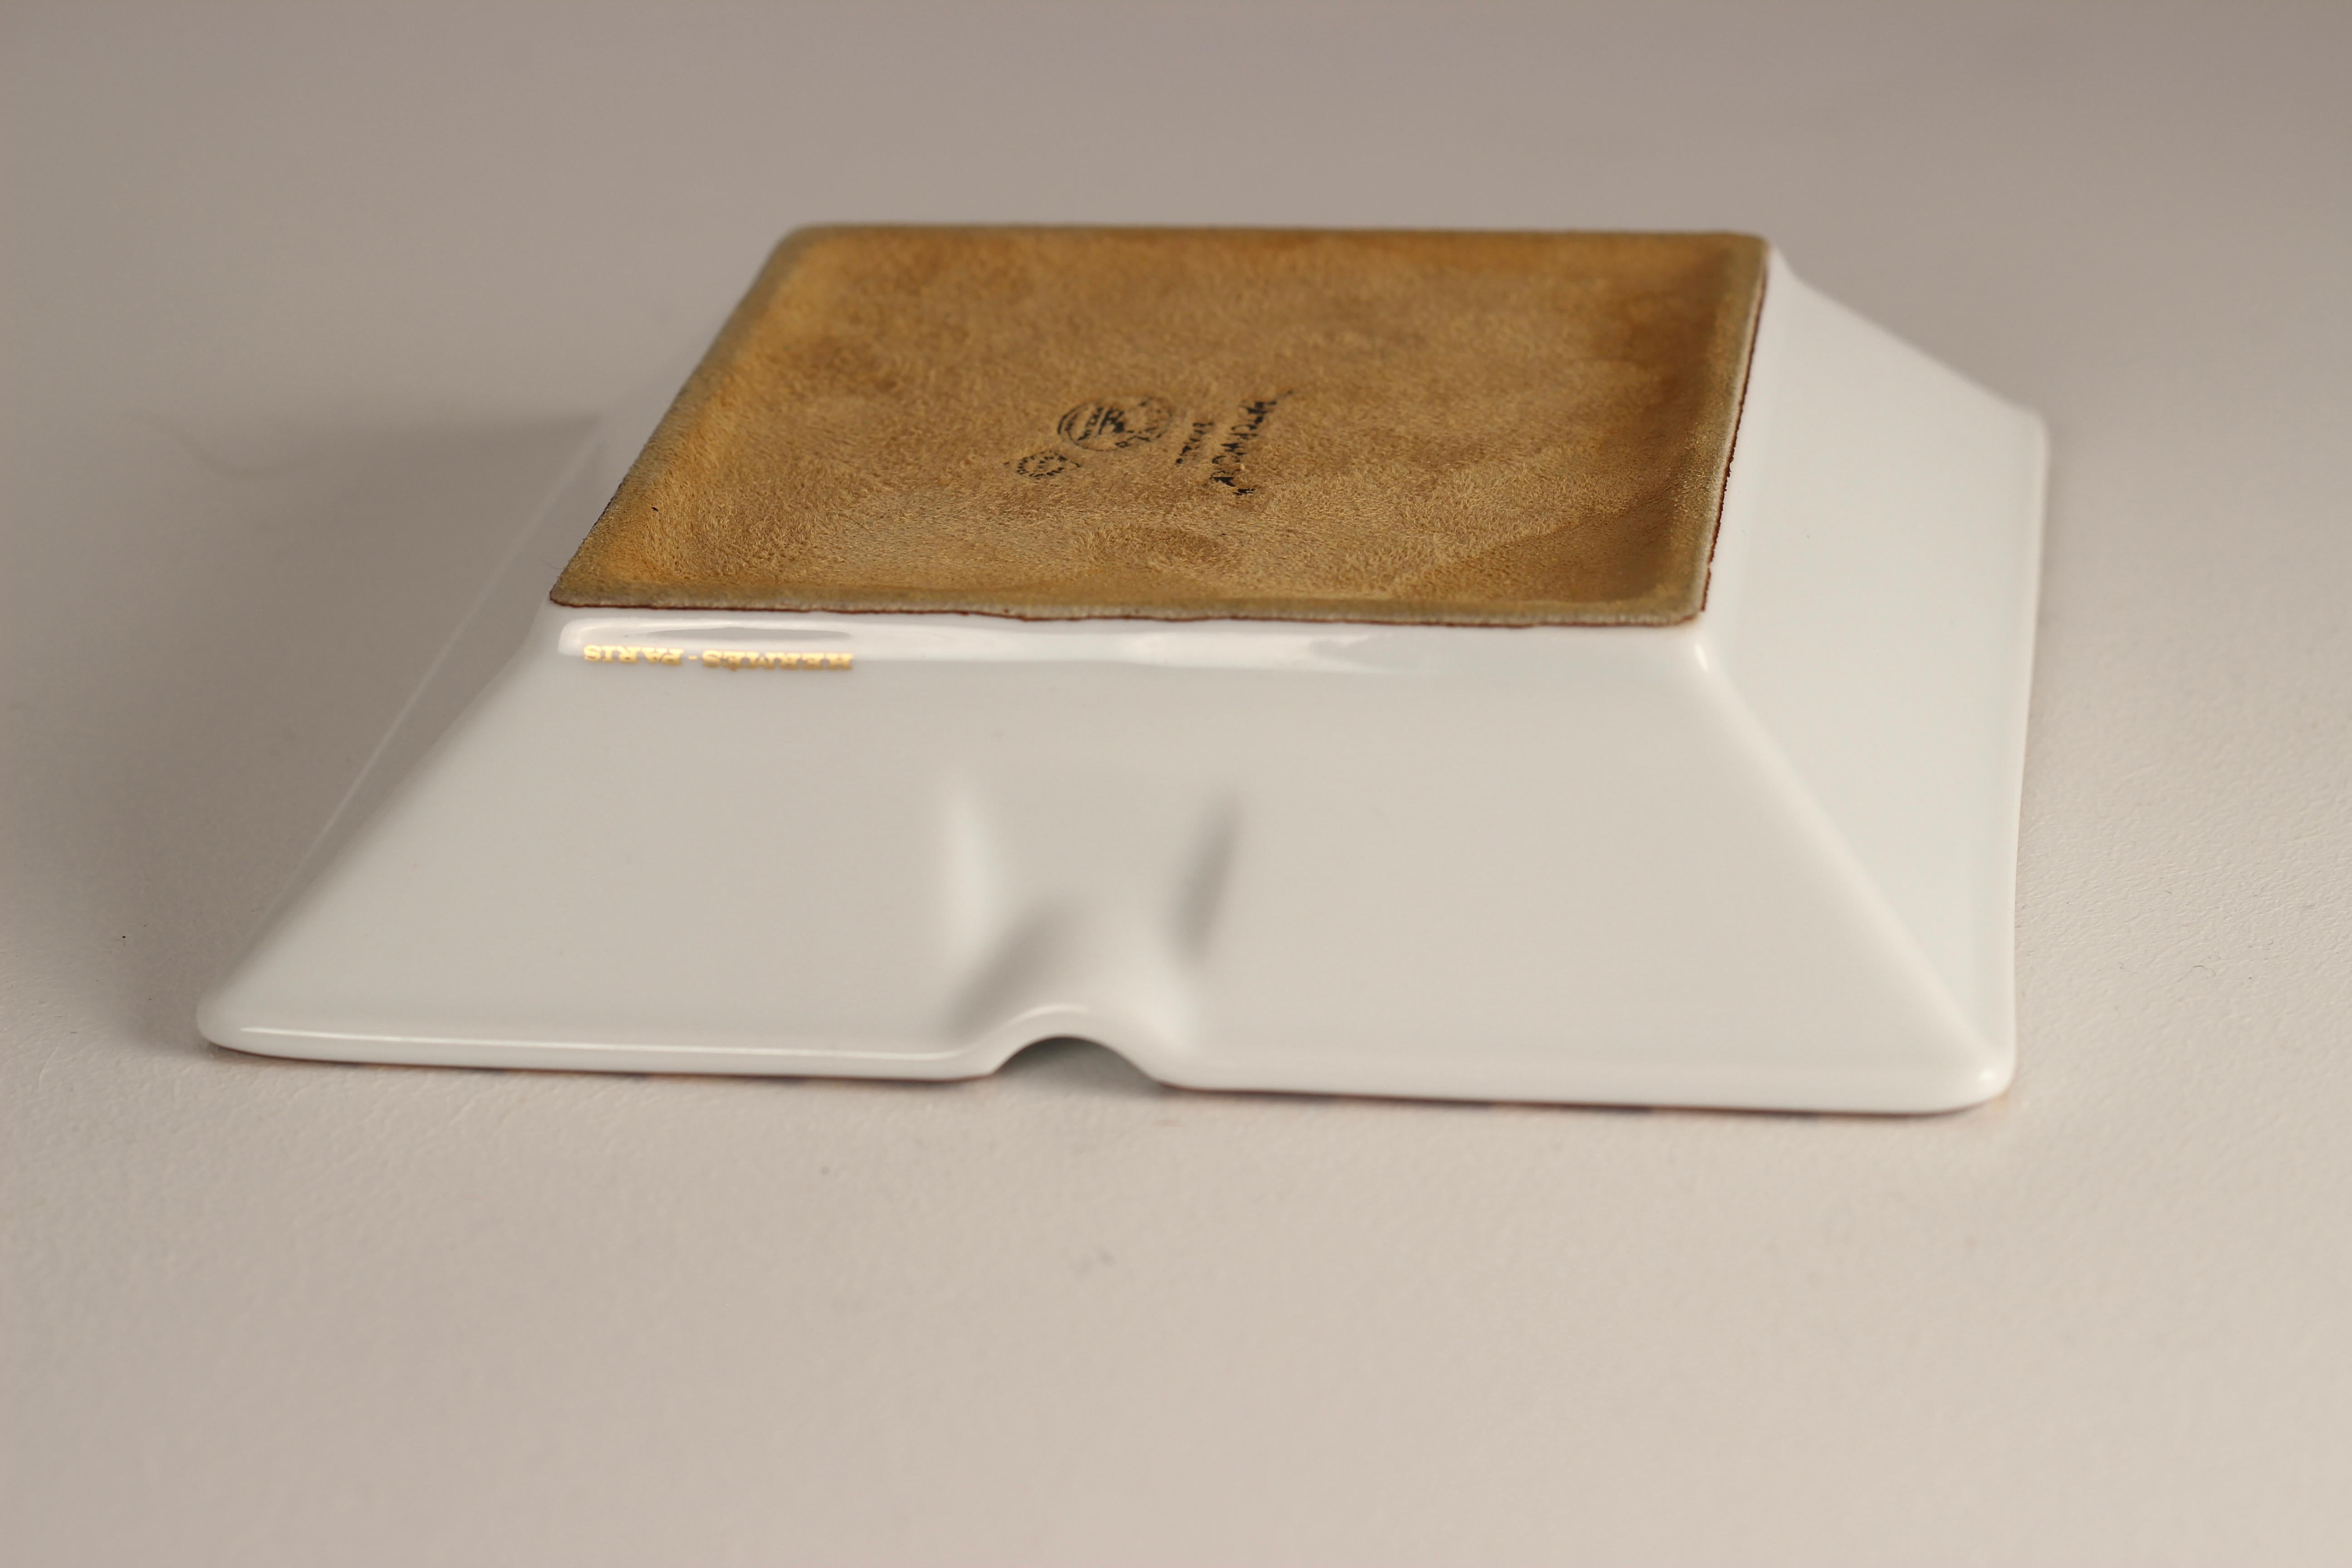 Late 20th Century Hermès Porcelain Ashtray or Tray Vide-Poche Catchall Made in France